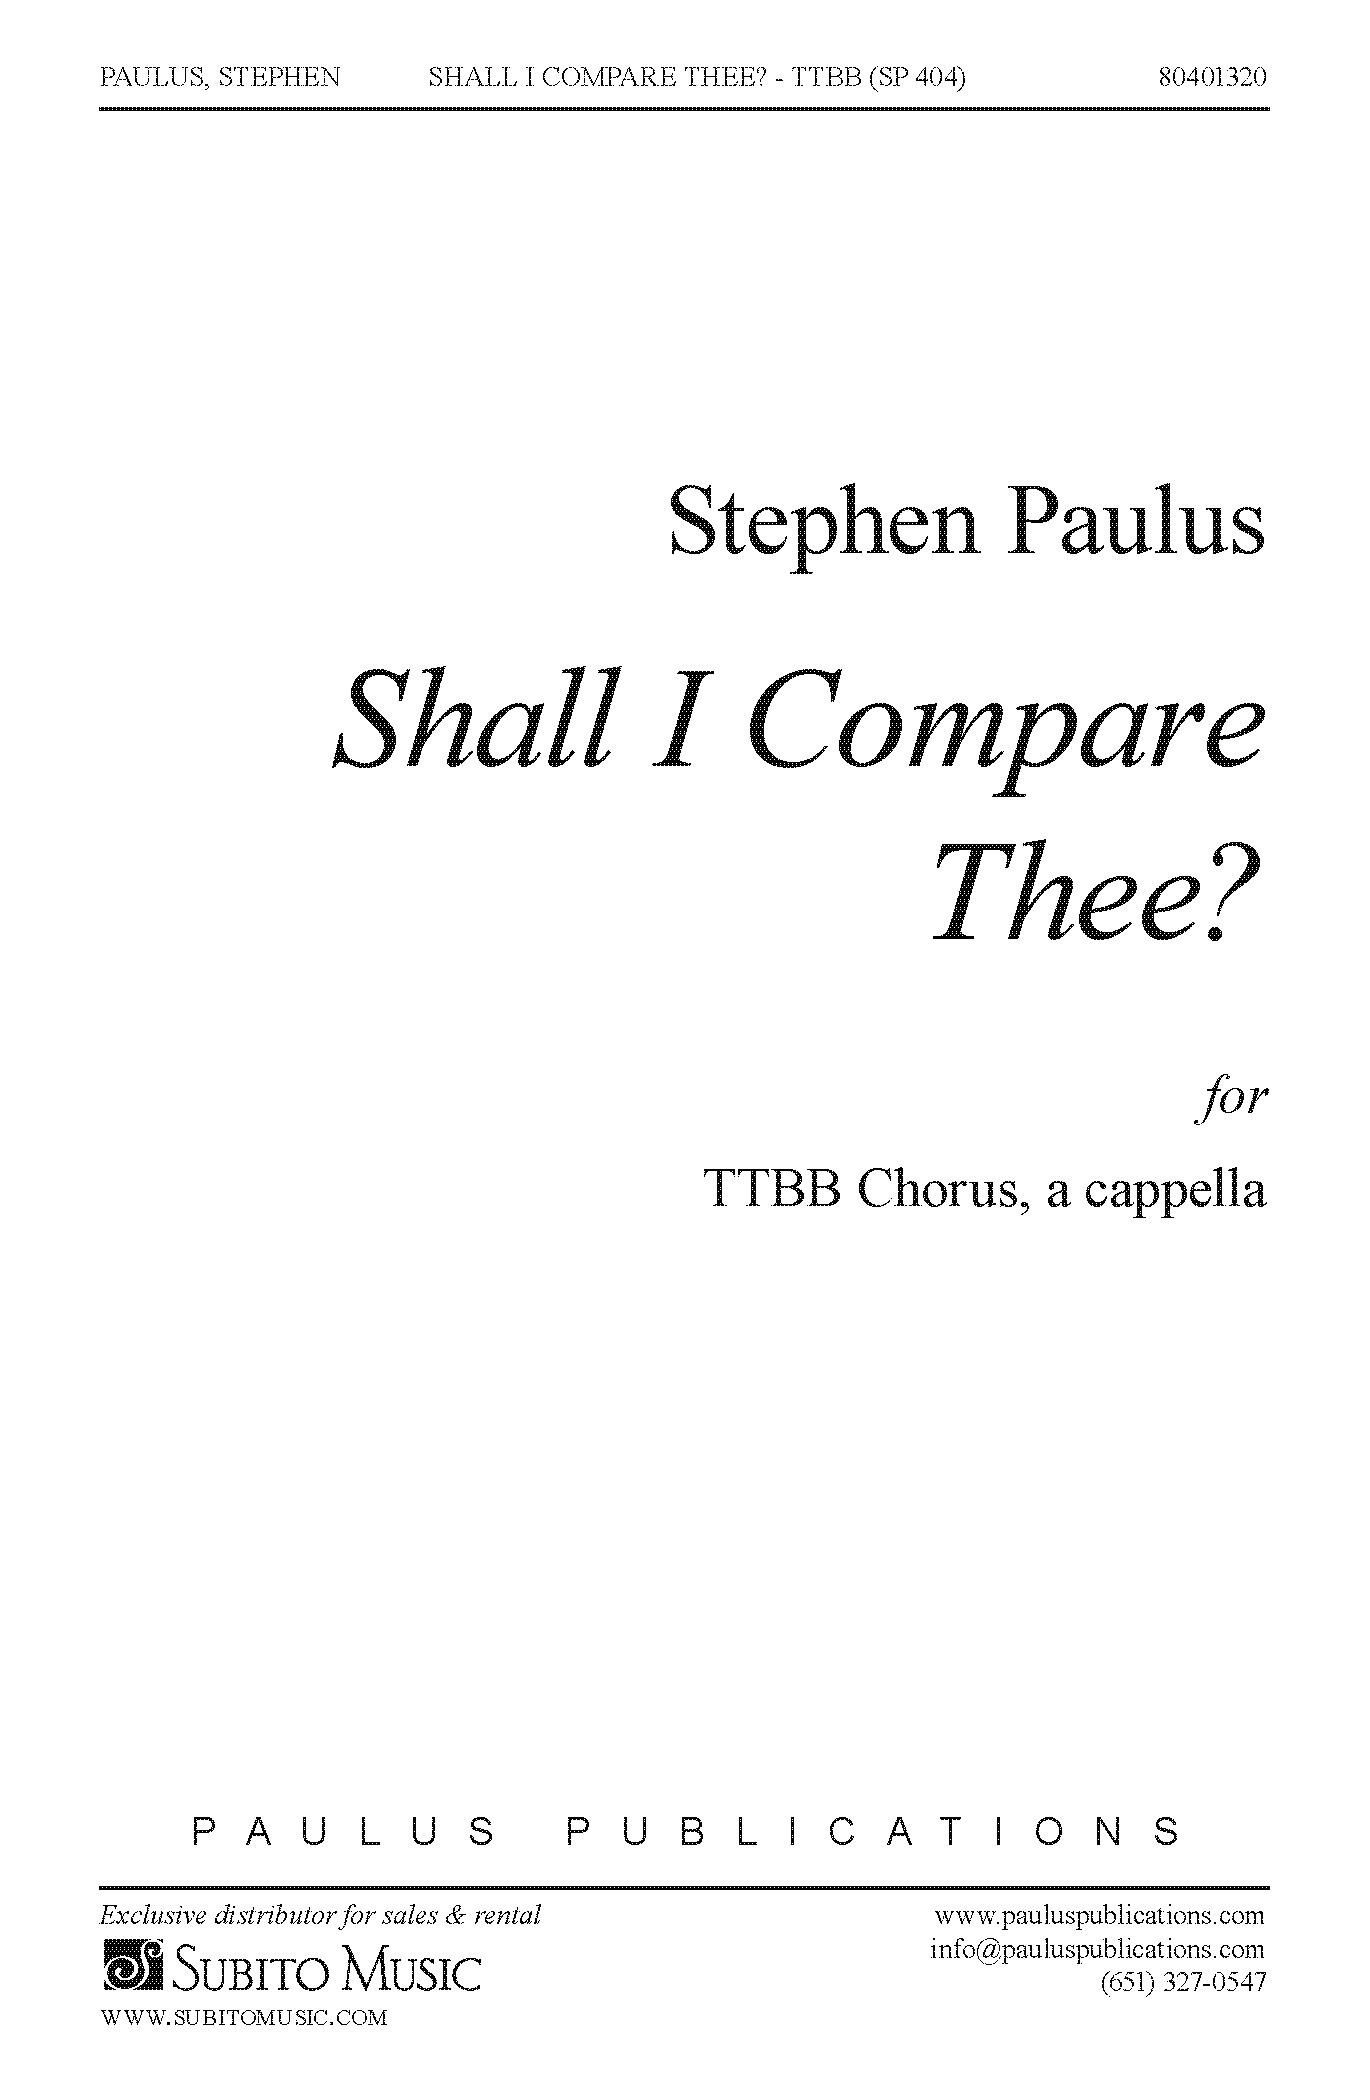 Shall I Compare Thee? for TTBB Chorus, a cappella